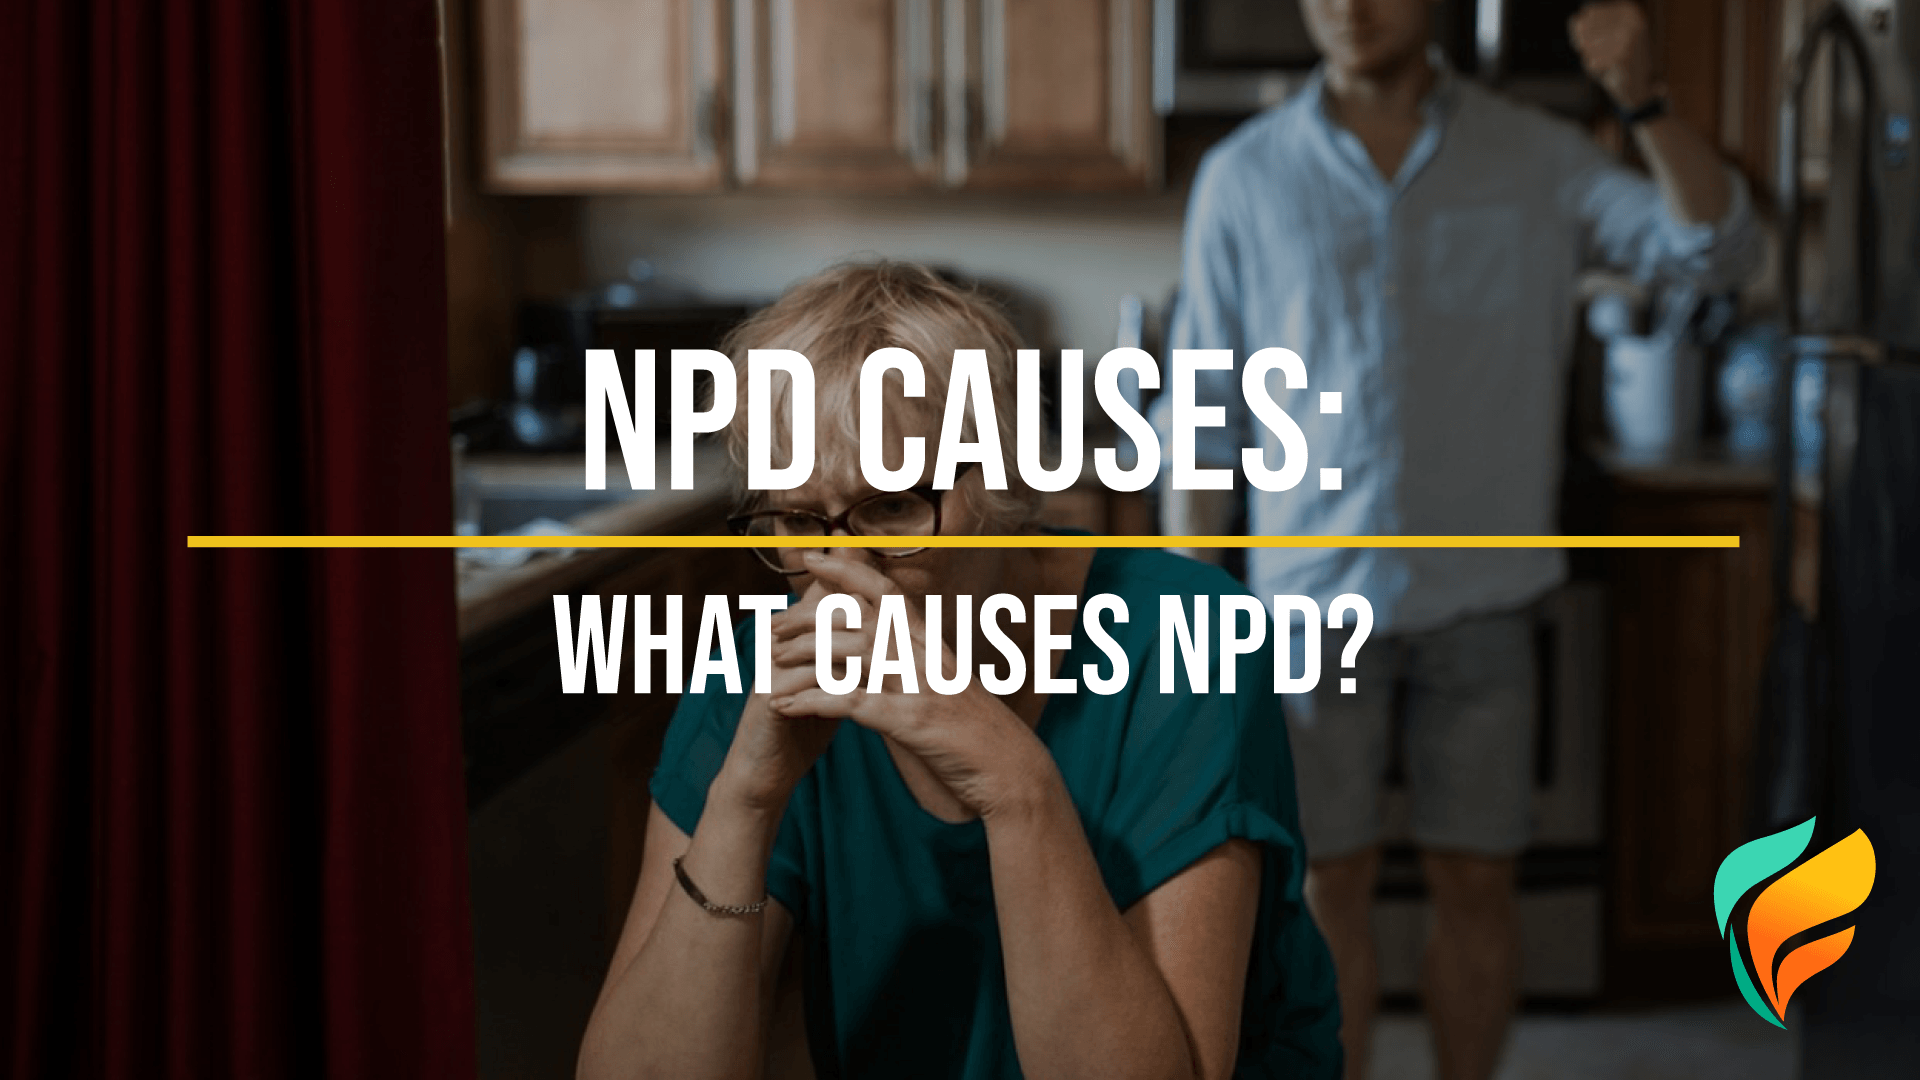 NPD Causes: What Causes Narcissistic Personality Disorder?